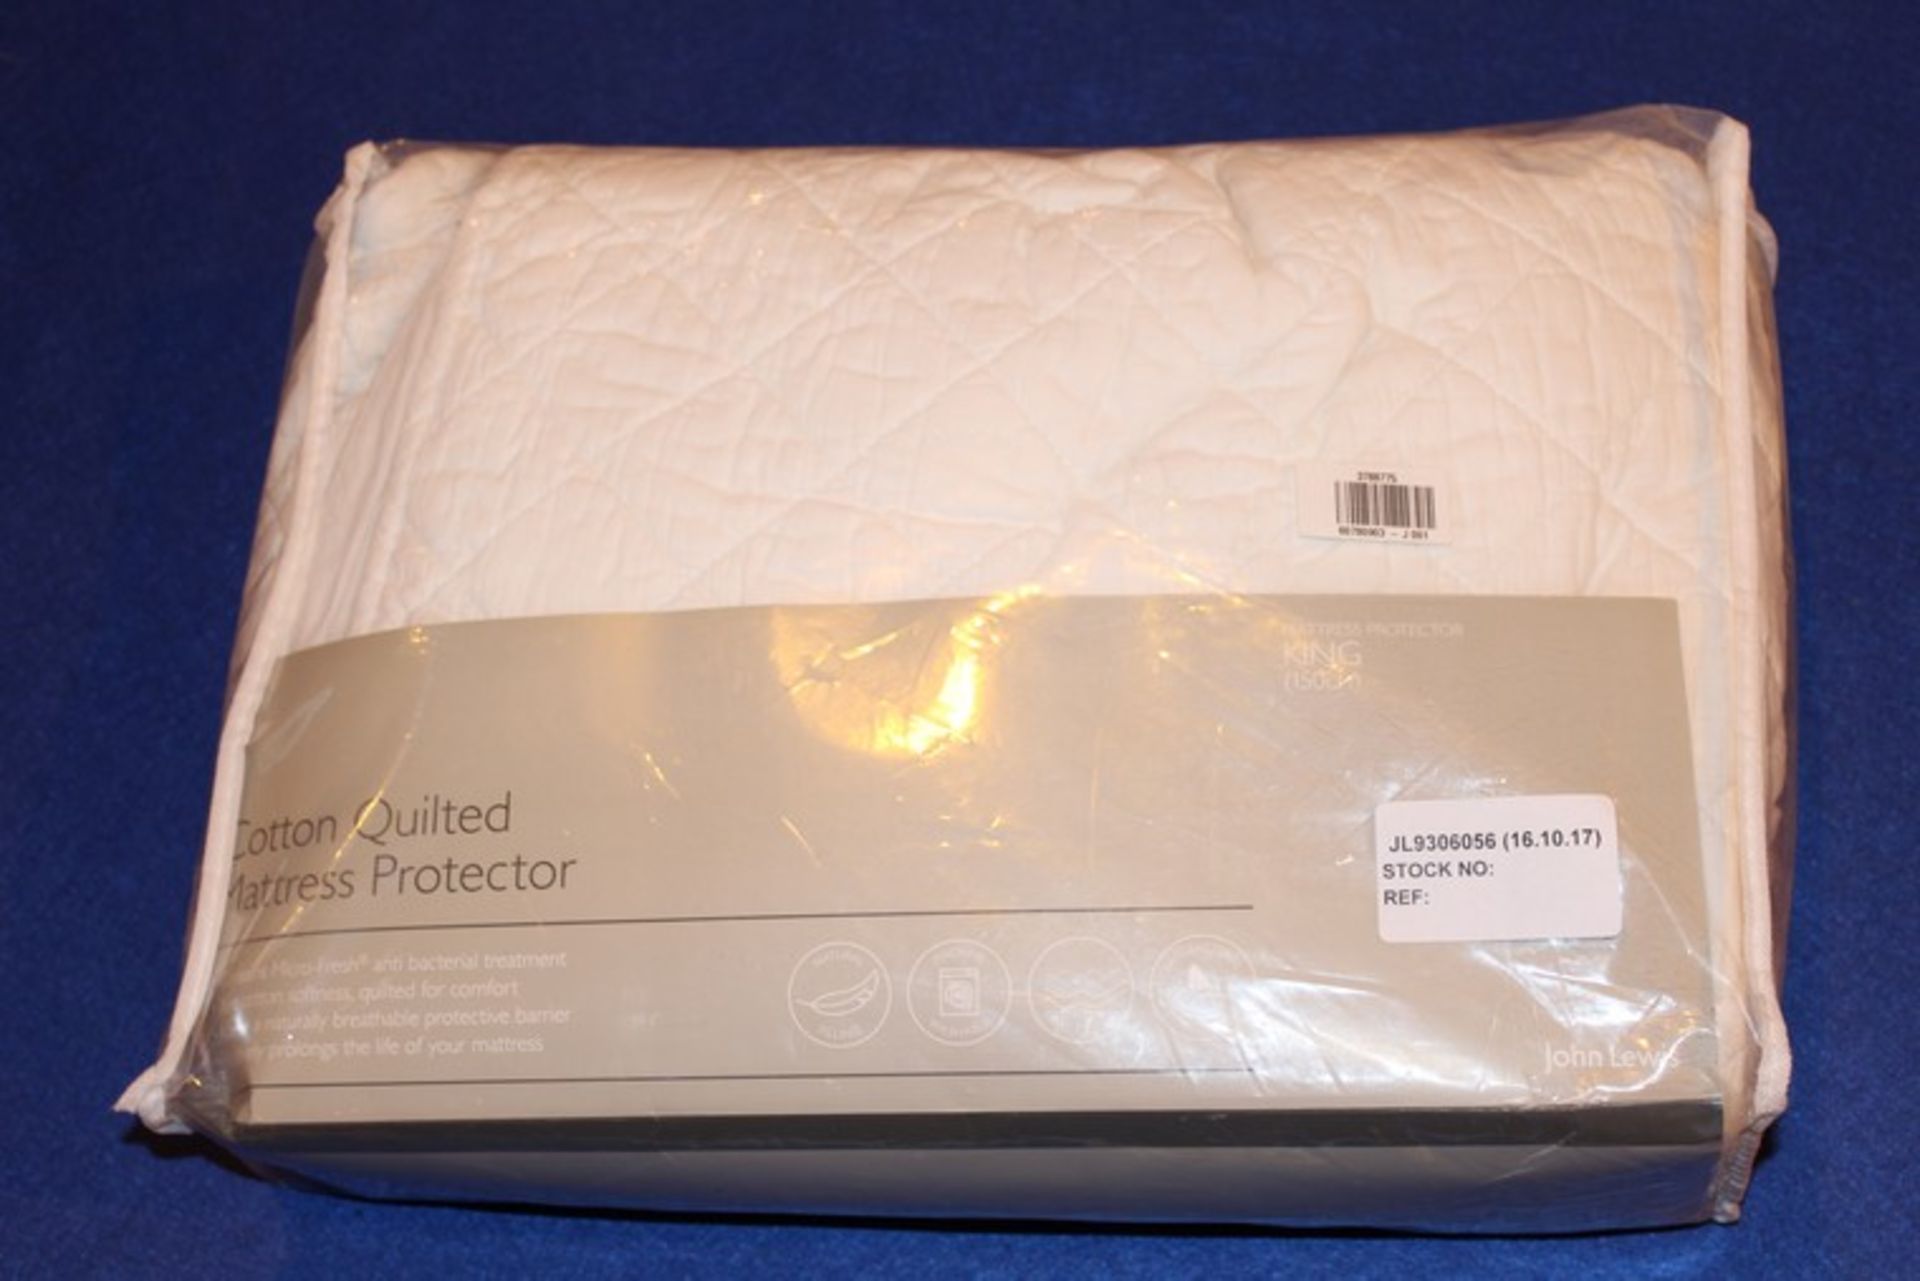 2 x BAGGED QUILTED COTTON MATTRESS PROTECTORS RRP £40 EACH (16.10.17) *PLEASE NOTE THAT THE BID